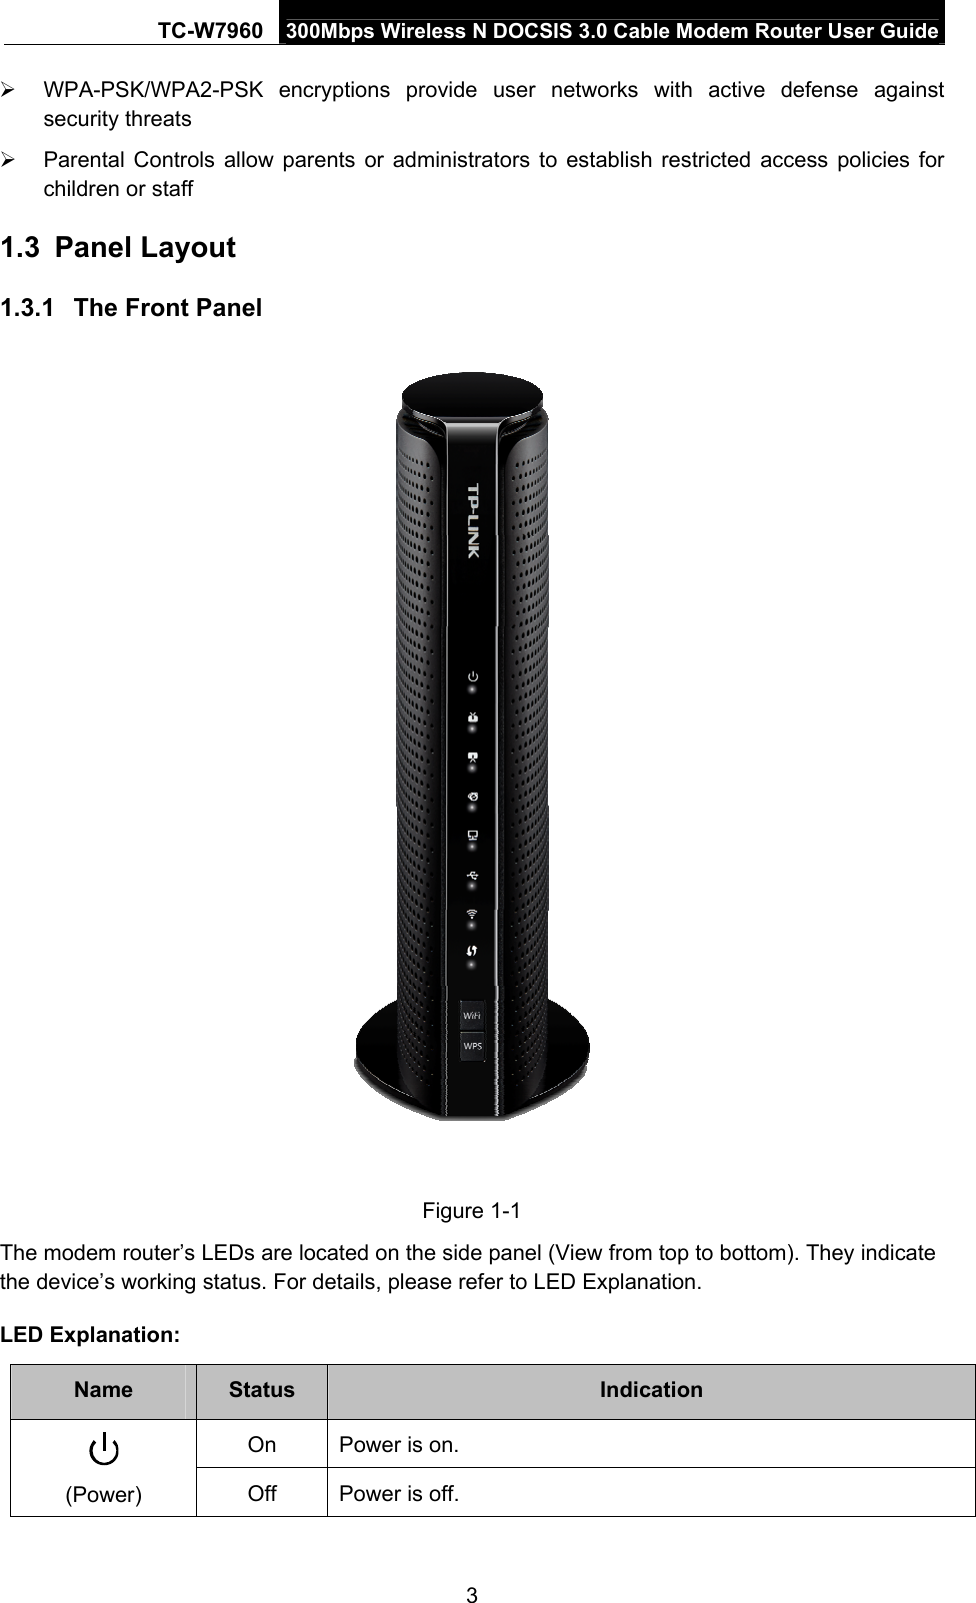 TC-W7960  300Mbps Wireless N DOCSIS 3.0 Cable Modem Router User Guide  WPA-PSK/WPA2-PSK encryptions provide user networks with active defense against security threats   Parental Controls allow parents or administrators to establish restricted access policies for children or staff 1.3  Panel Layout 1.3.1  The Front Panel  Figure 1-1 The modem router’s LEDs are located on the side panel (View from top to bottom). They indicate the device’s working status. For details, please refer to LED Explanation.  LED Explanation: Name  Status  Indication On  Power is on.  (Power)  Off Power is off. 3 